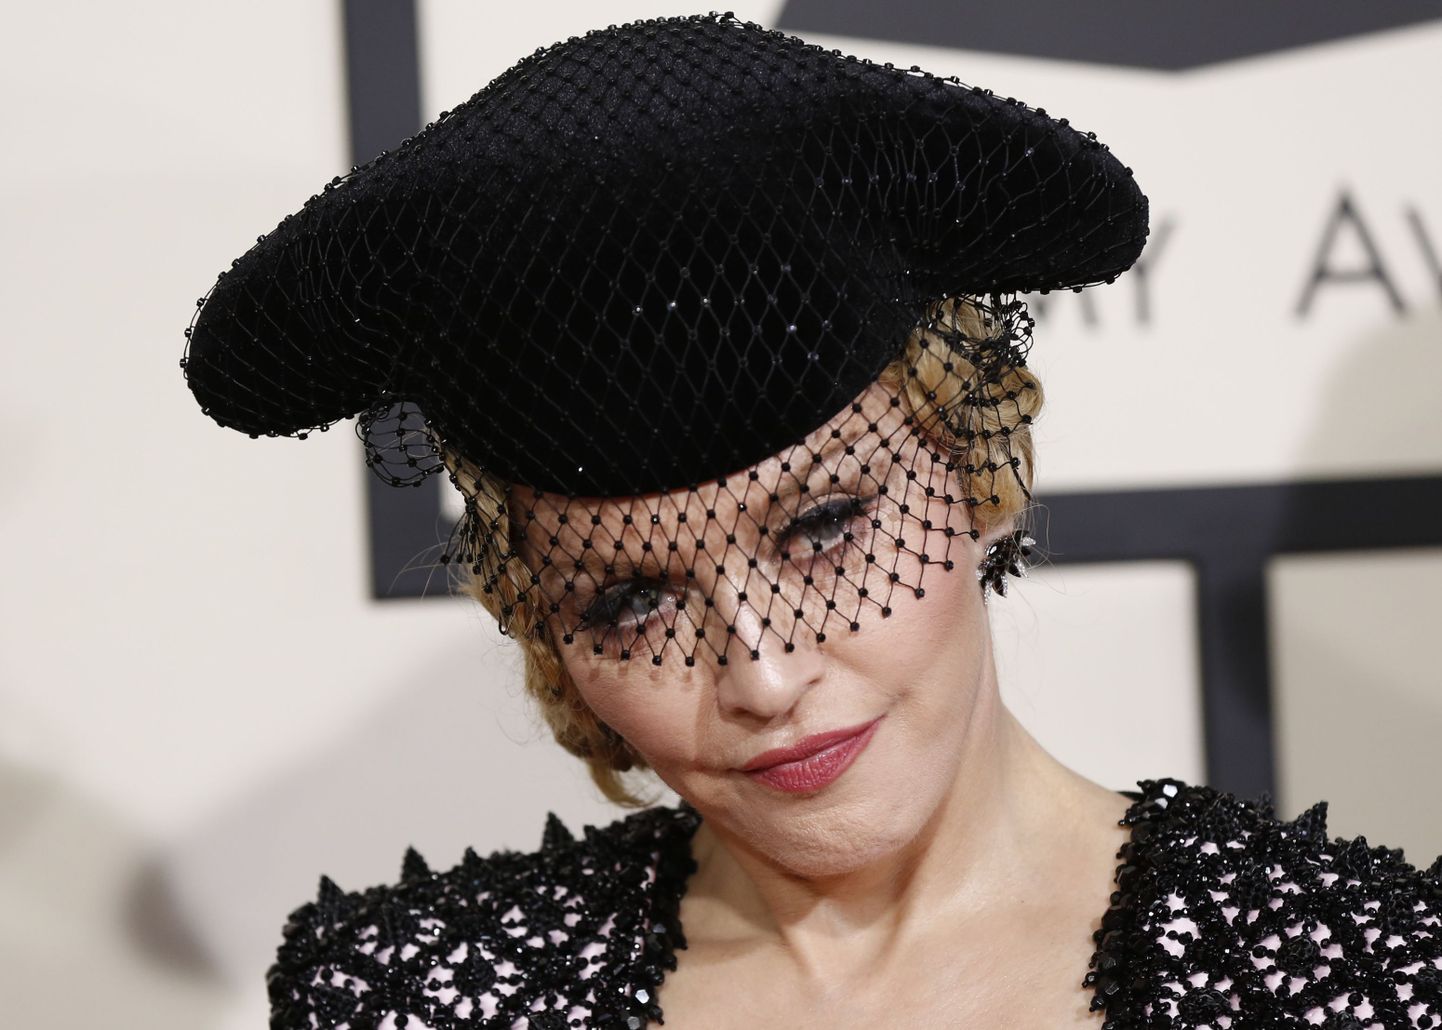 Madonna arrives at the 57th annual Grammy Awards in Los Angeles, California February 8, 2015.   REUTERS/Mario Anzuoni (UNITED STATES  - Tags: ENTERTAINMENT)   (GRAMMYS-ARRIVALS)